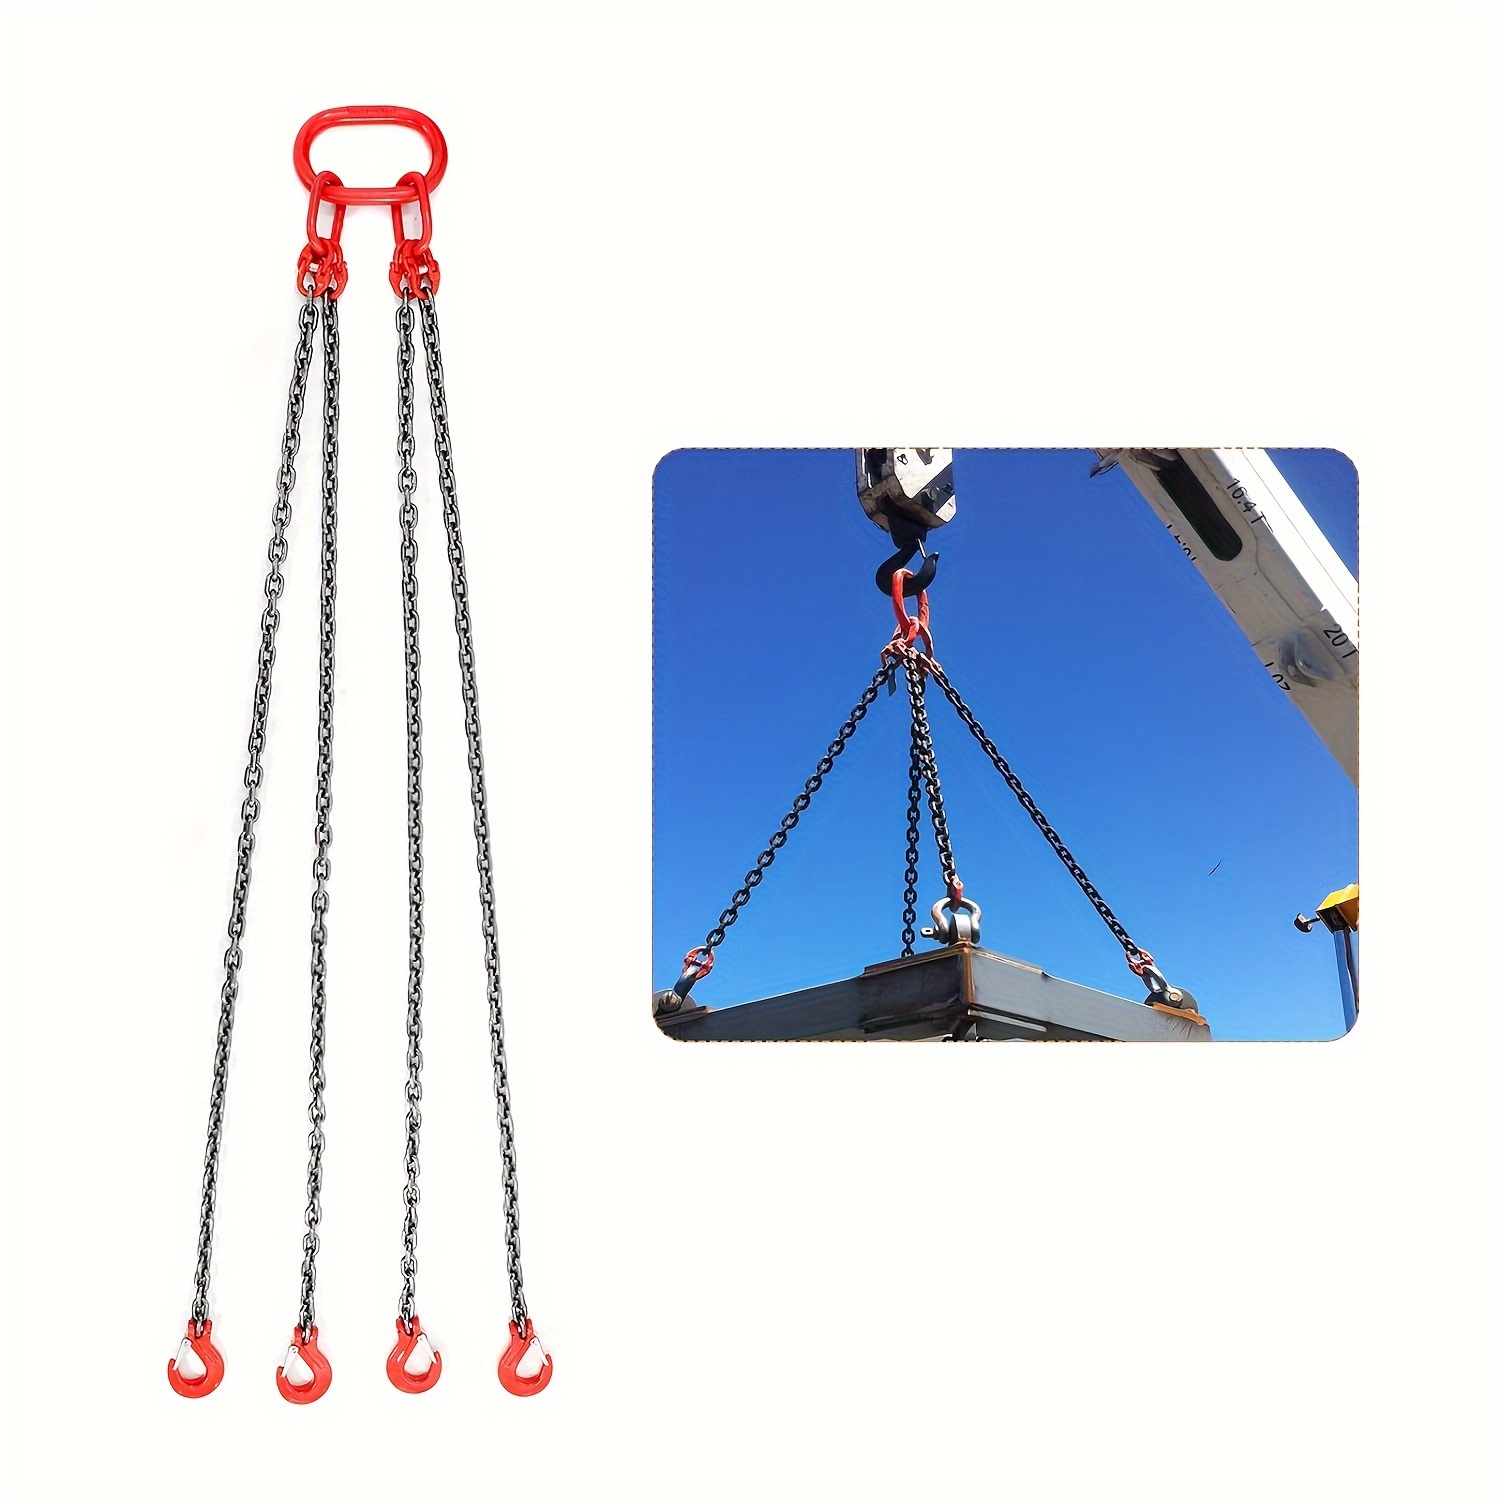 

Lifting Chains With Hooks, Chain Slings 1.5m For Engine Hoist 4 Leg Industrial Grab Hook Heavy Duty For Factory Building Site Mining Harbor Construction